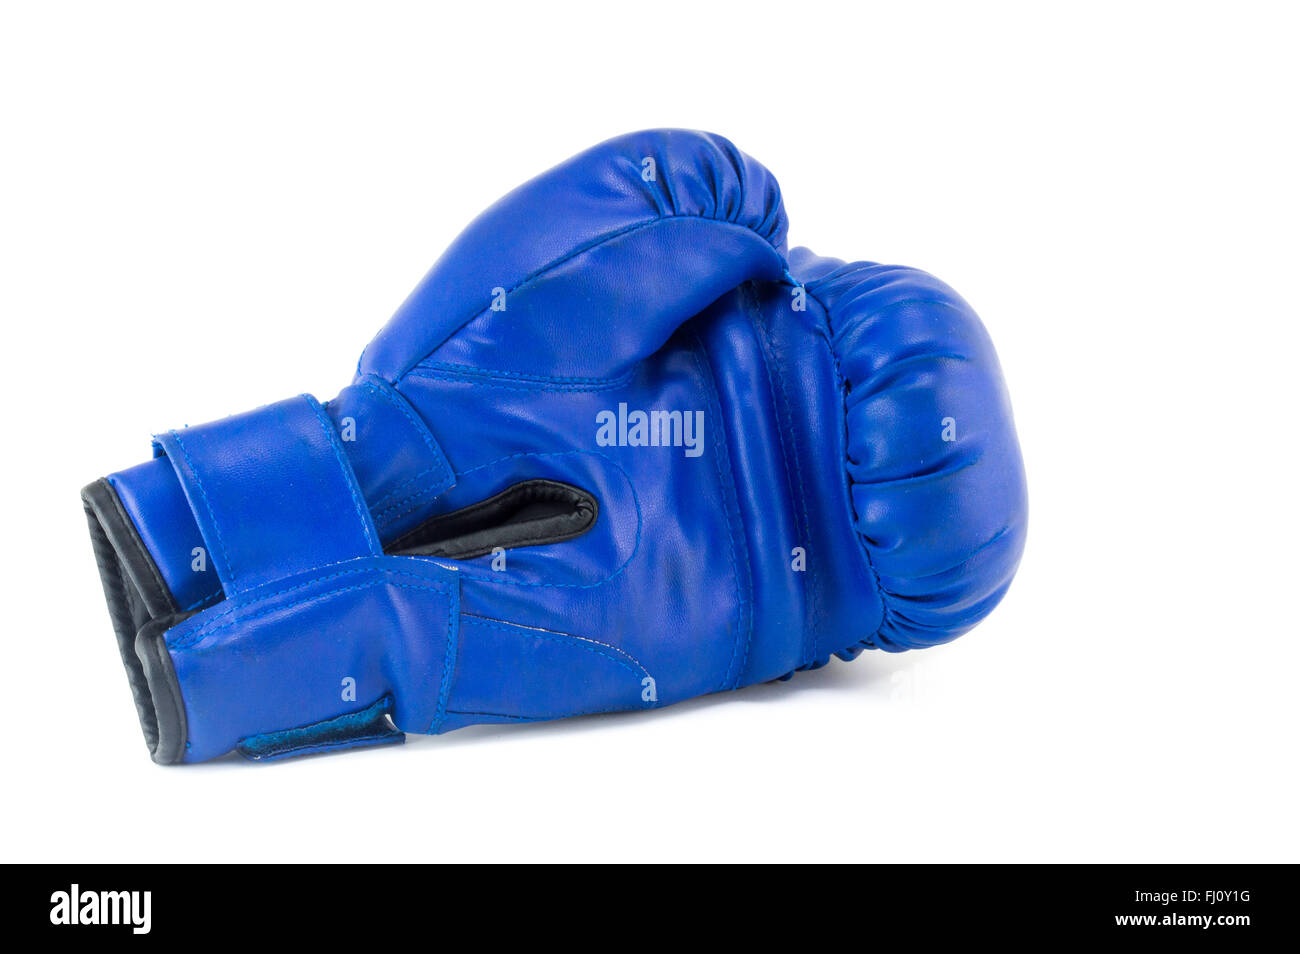 Blue boxing glove isolated on white Stock Photo